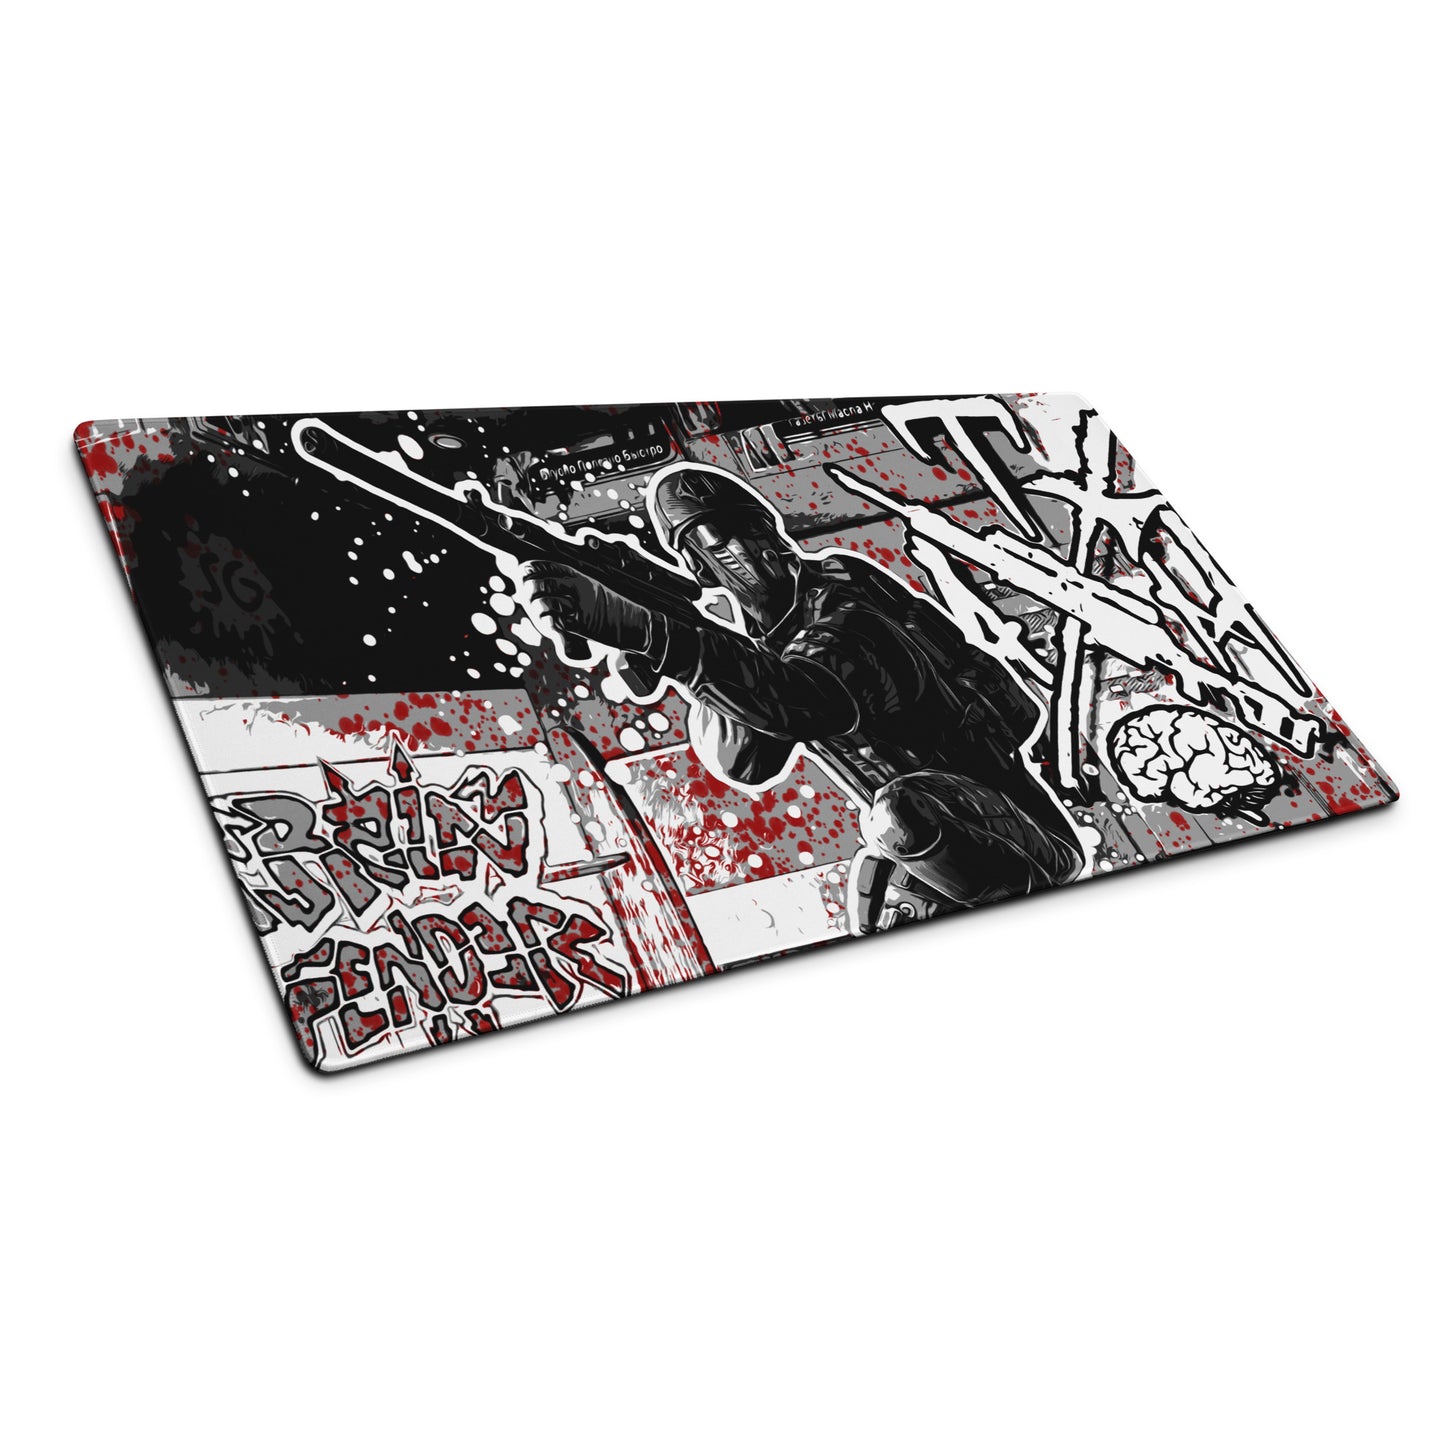 TAHXIQ MOUSE PAD